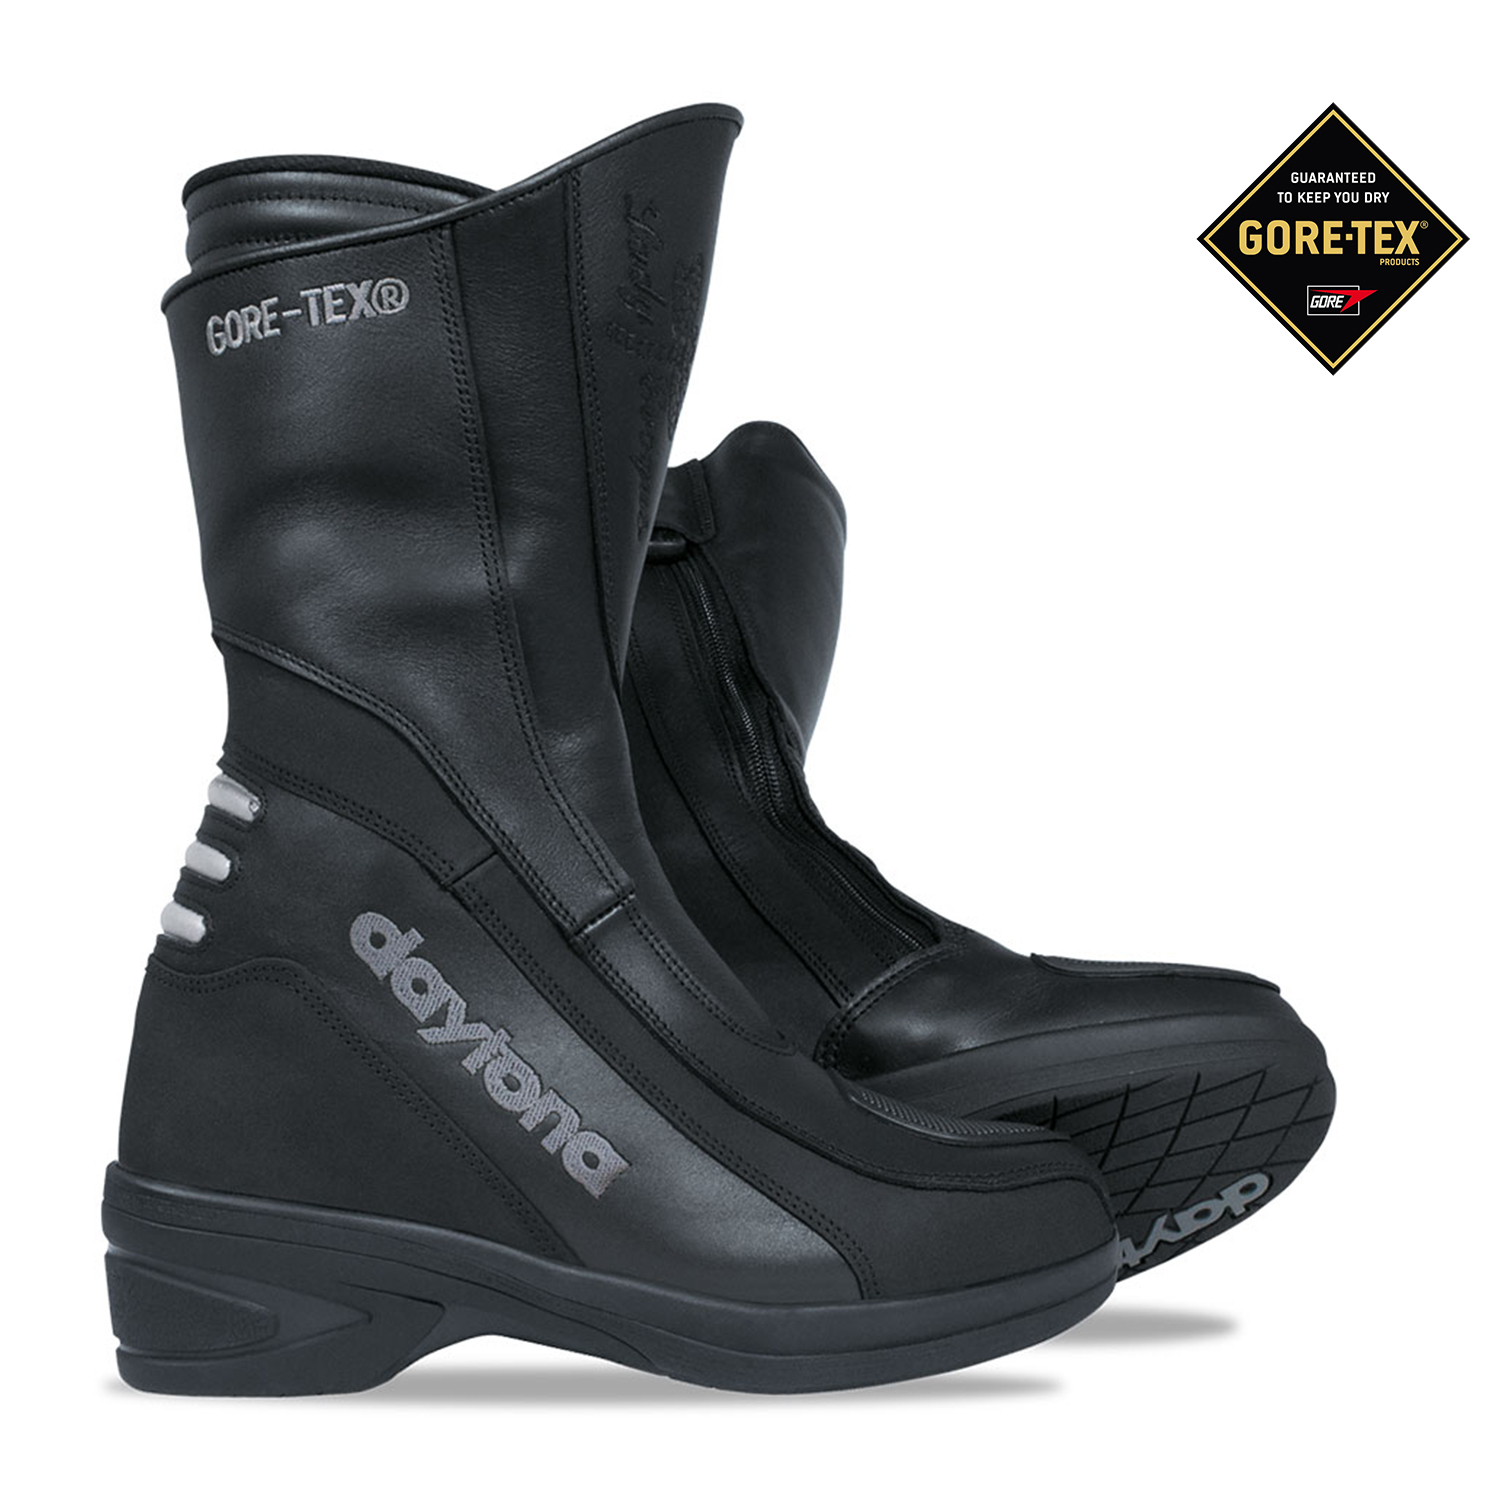 Daytona Lady Evoque GTX Boots Black - Available in Various Sizes